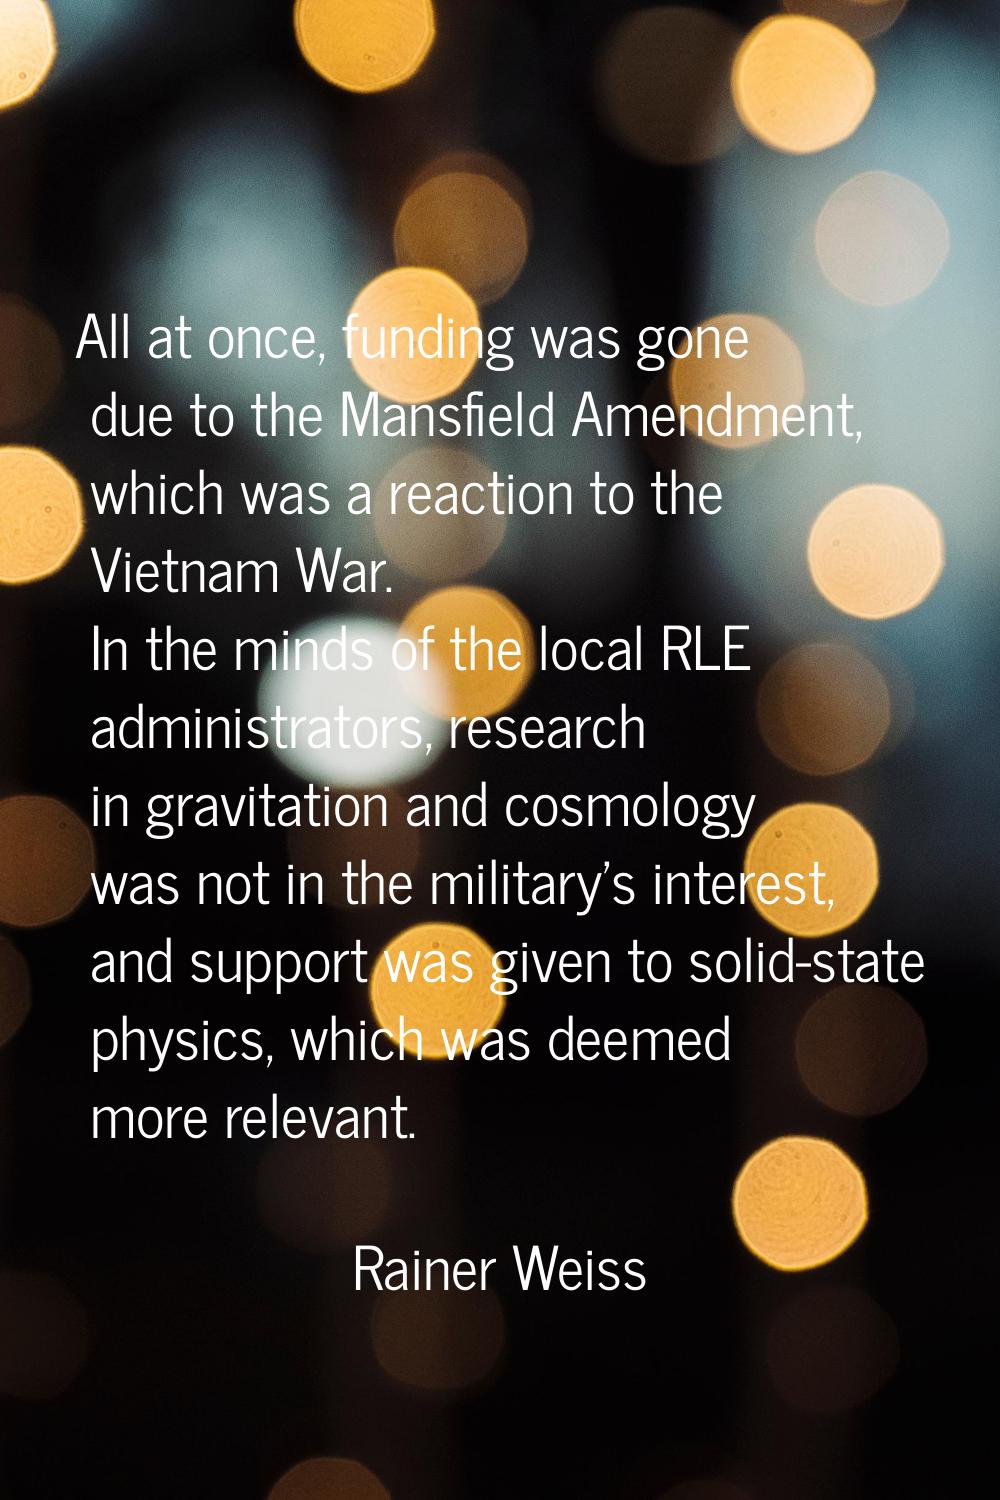 All at once, funding was gone due to the Mansfield Amendment, which was a reaction to the Vietnam W